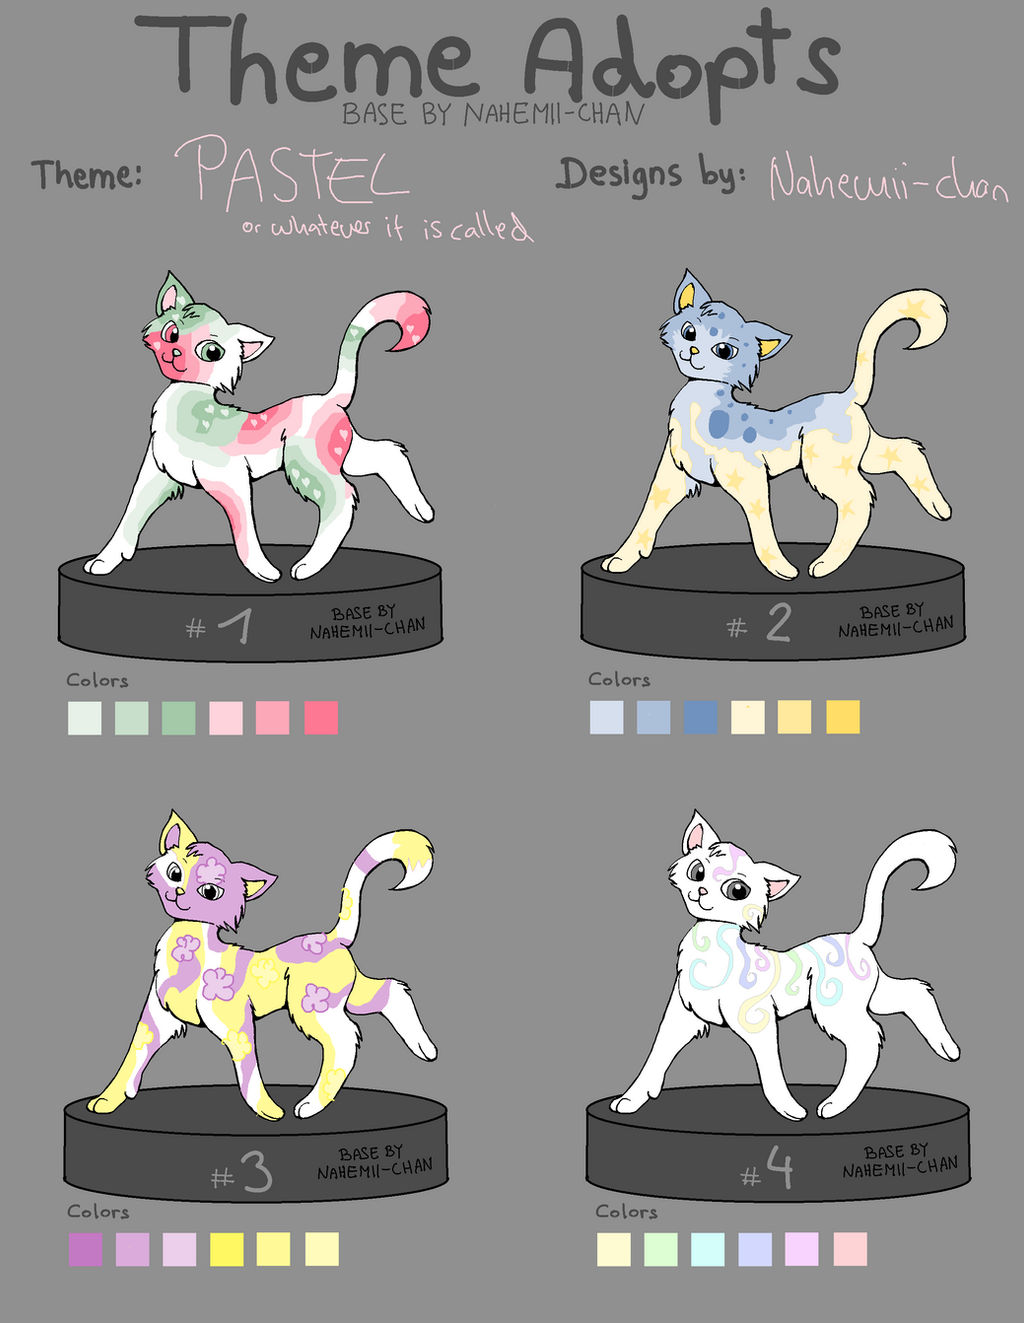 Pastel Theme Cat Adopts - moved